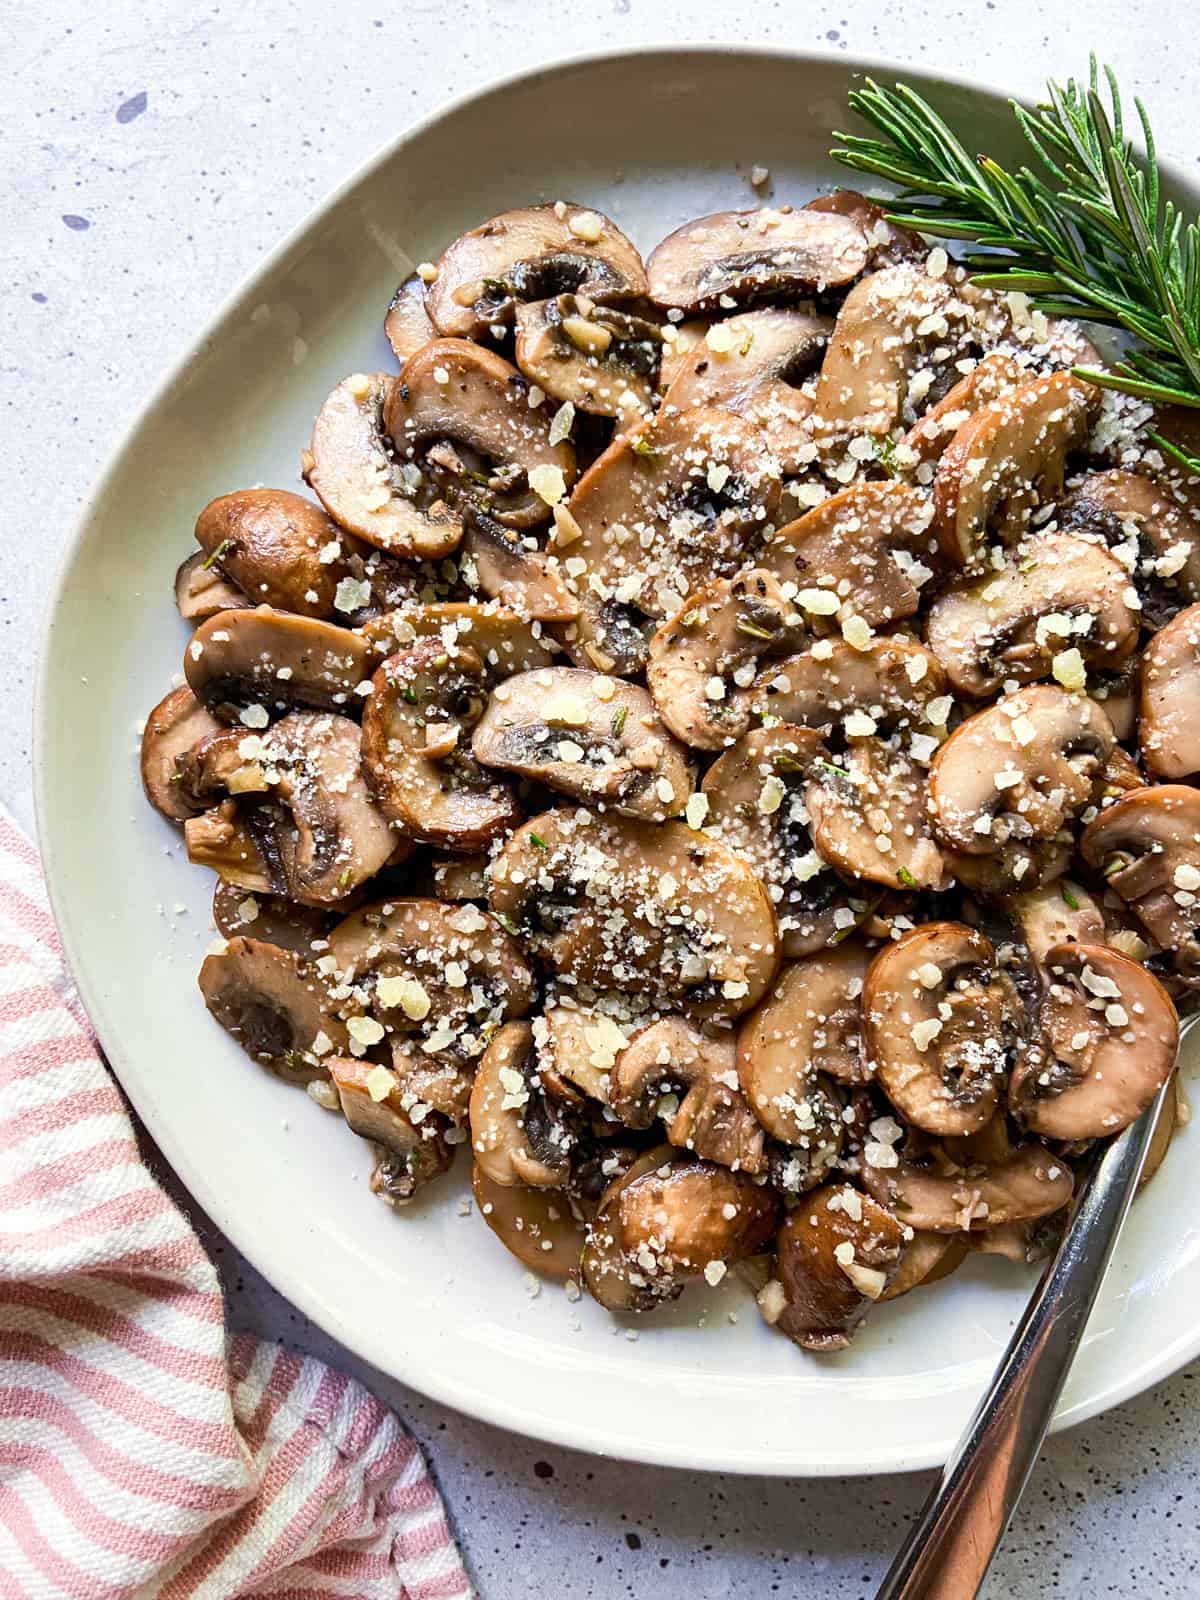 A plate of garlic butter mushrooms with a sprig of rosemary.